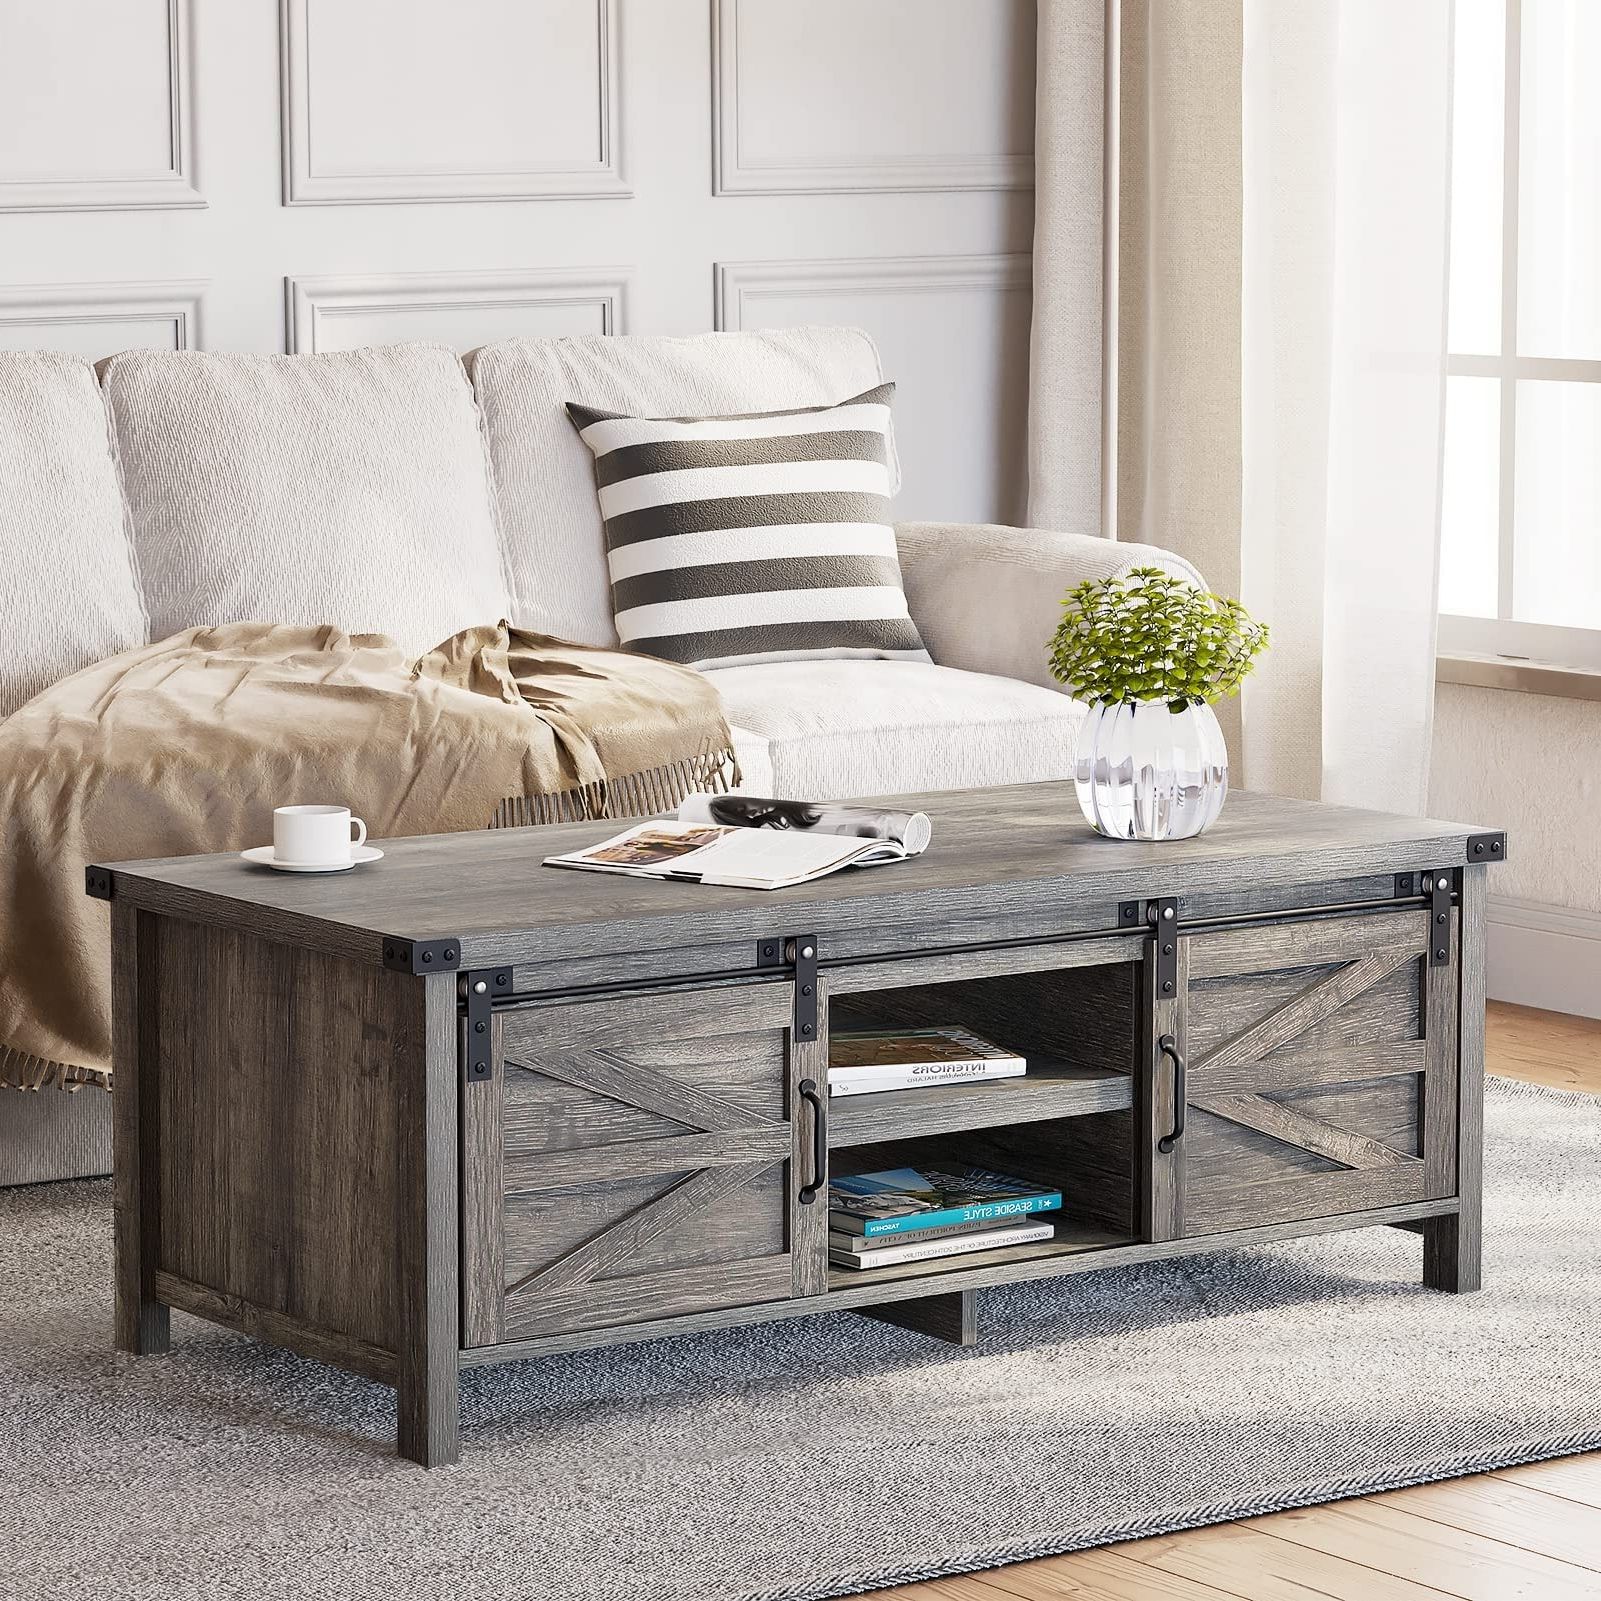 Most Recent Farmhouse Coffee Table With Sliding Barn Doors & Storage, Grey Rustic  Wooden Center Rectangular Tables – Bed Bath & Beyond – 37841722 With Regard To Coffee Tables With Storage And Barn Doors (View 5 of 10)